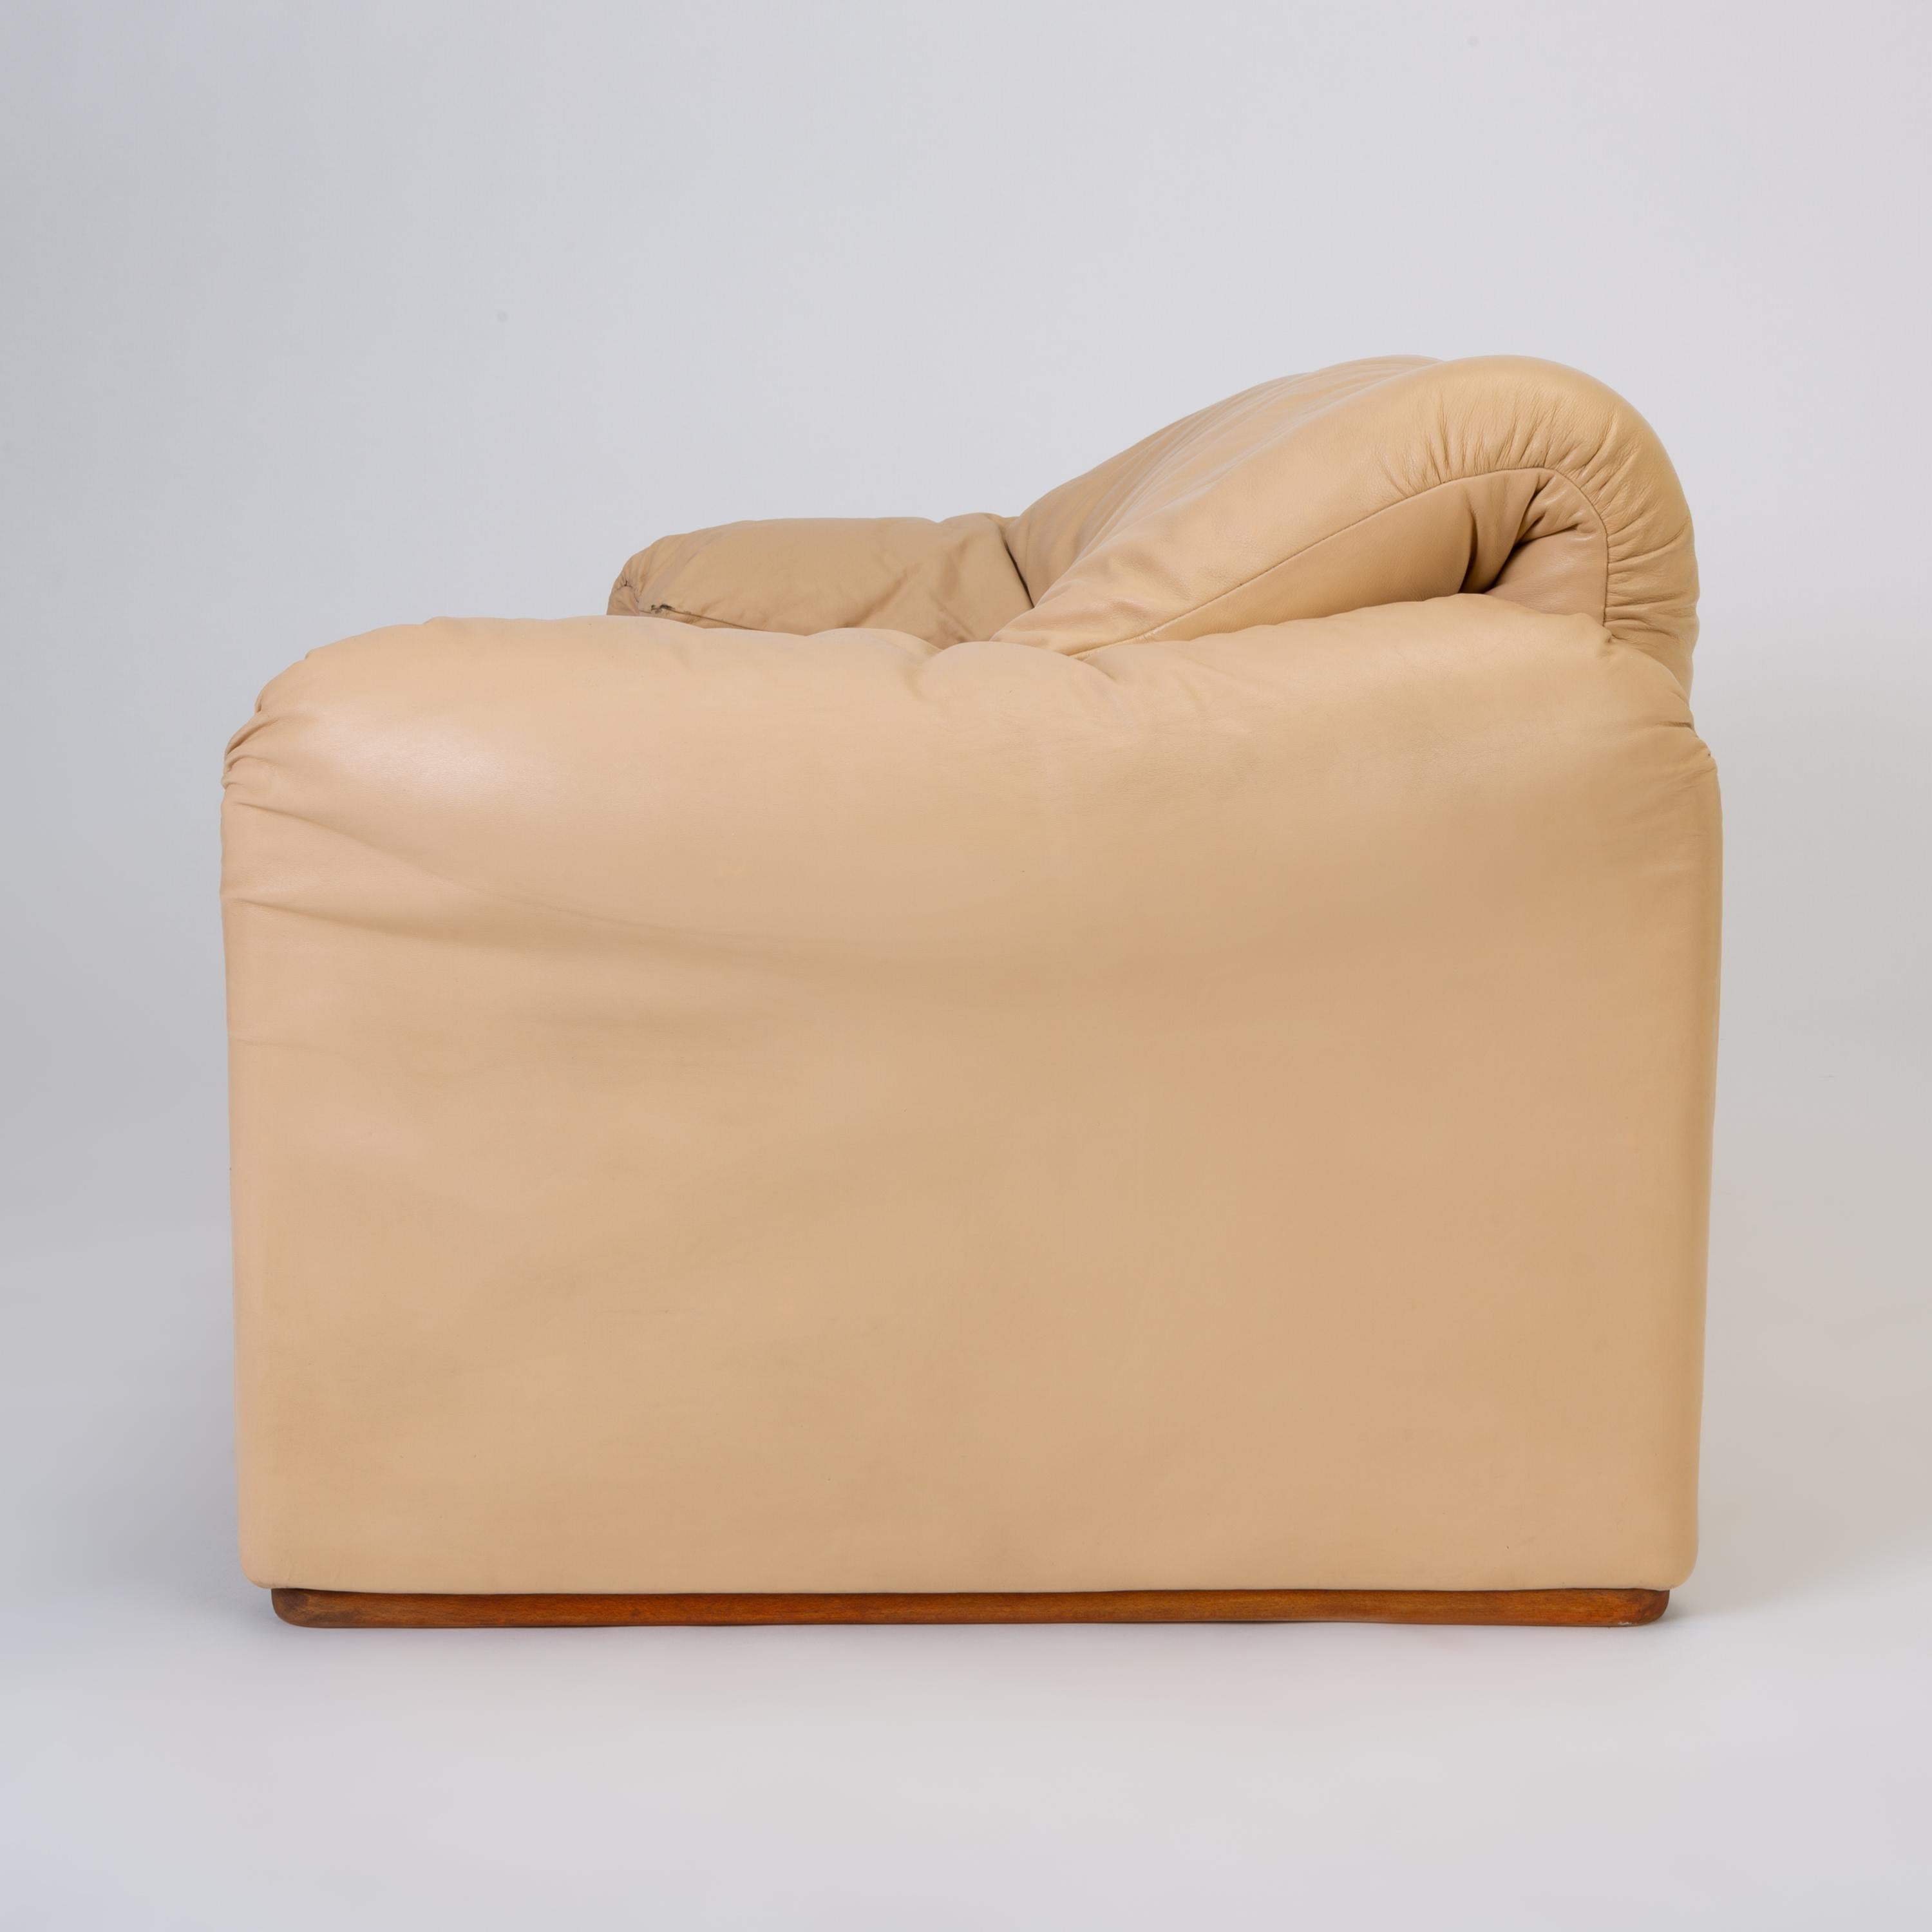 Late 20th Century Leather “Maralunga” Loveseat by Vico Magistretti for Cassina